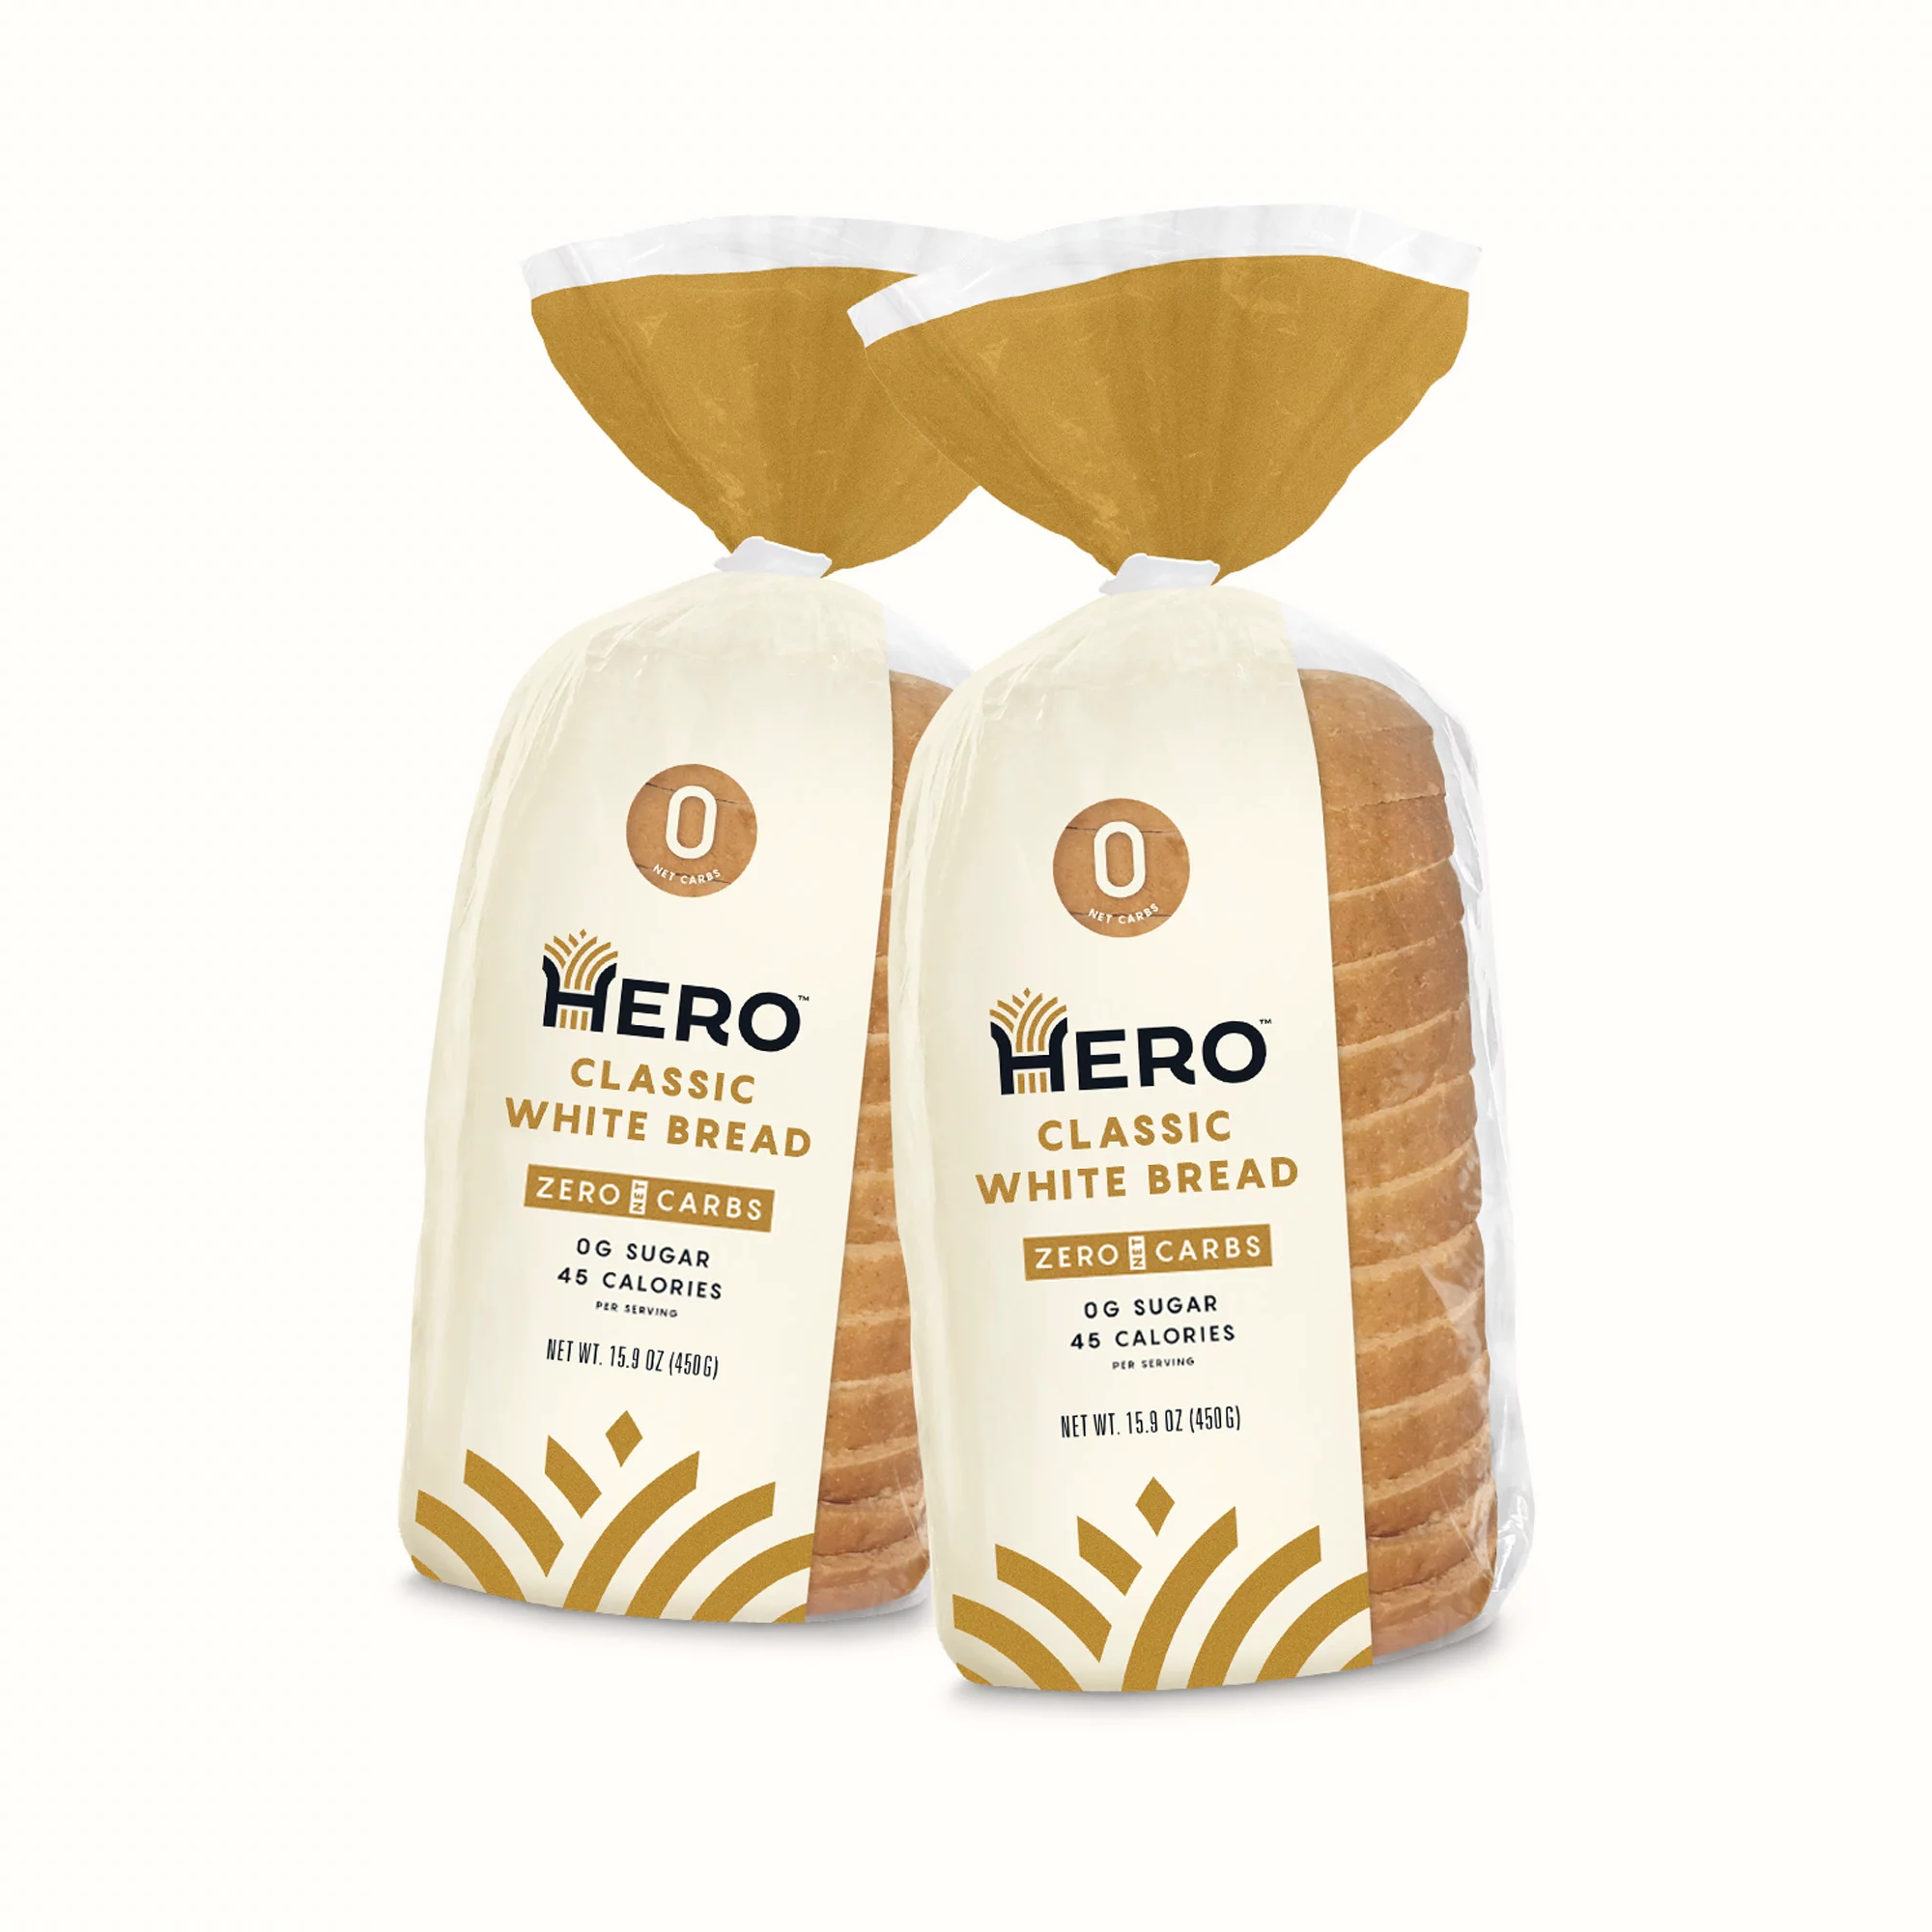 Hero Bread is made with quality ingredients and baked to perfection.